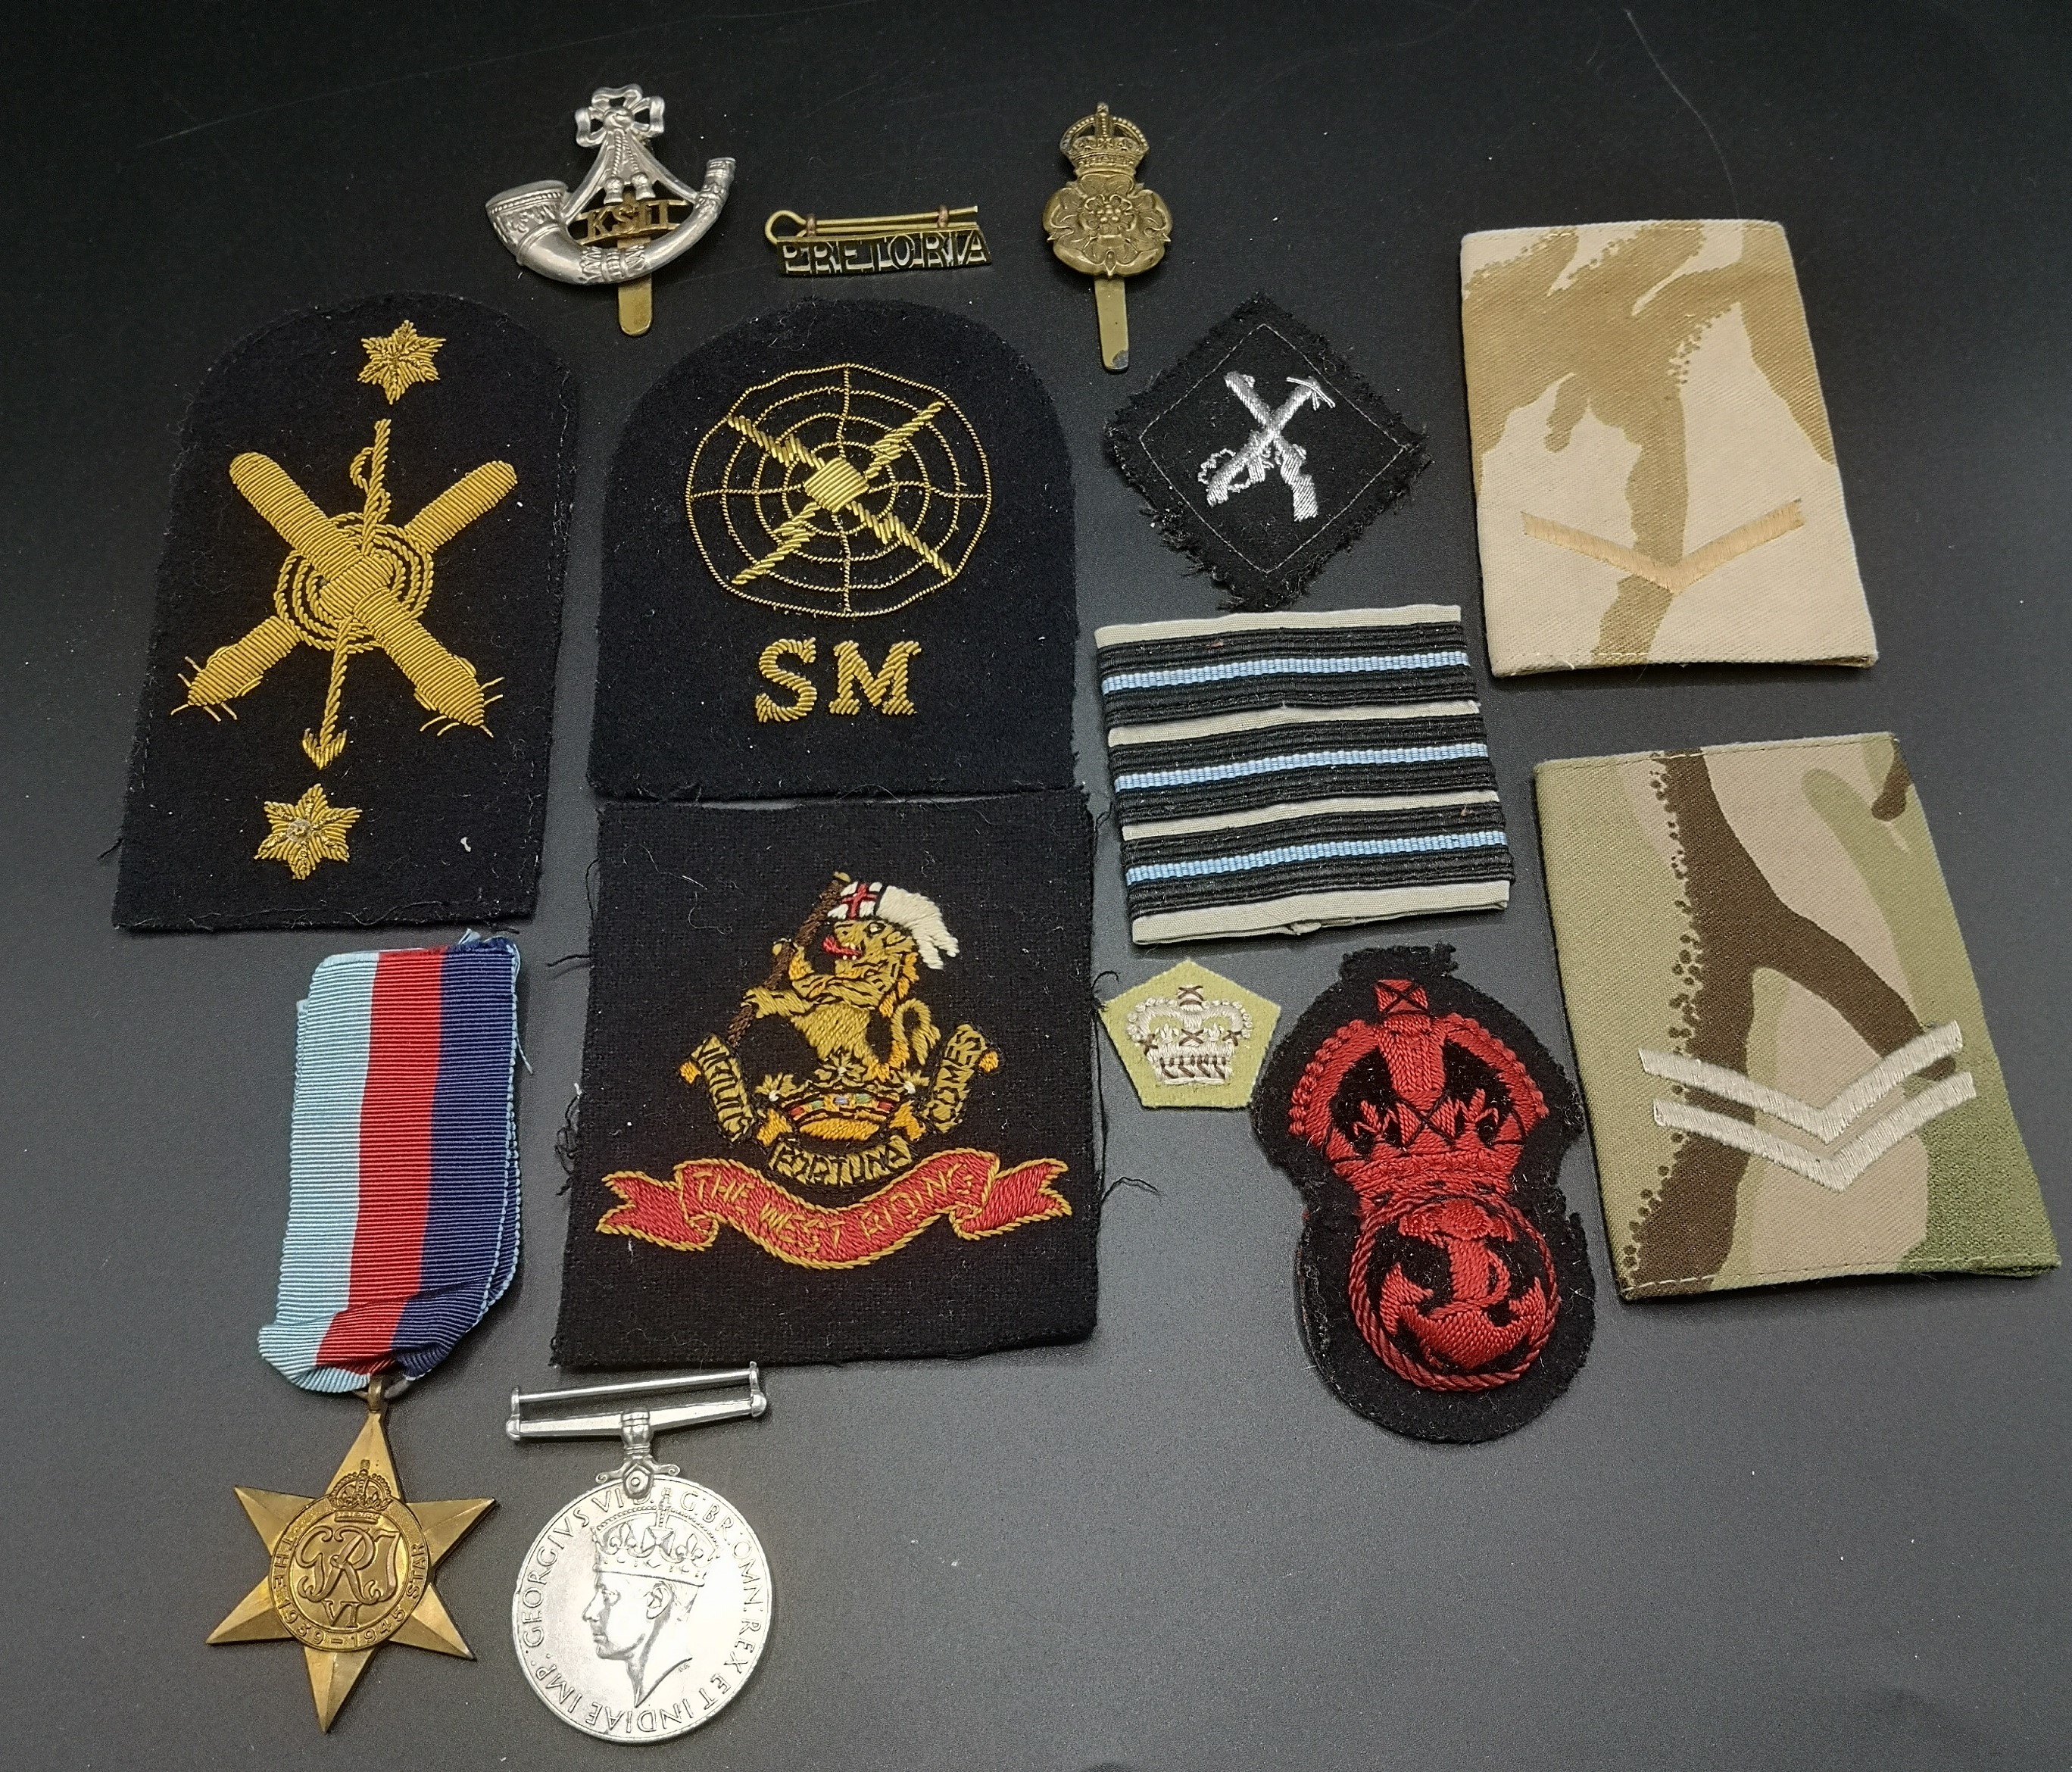 Two WWII medals together with a quantity of military patches and badges - Image 2 of 3